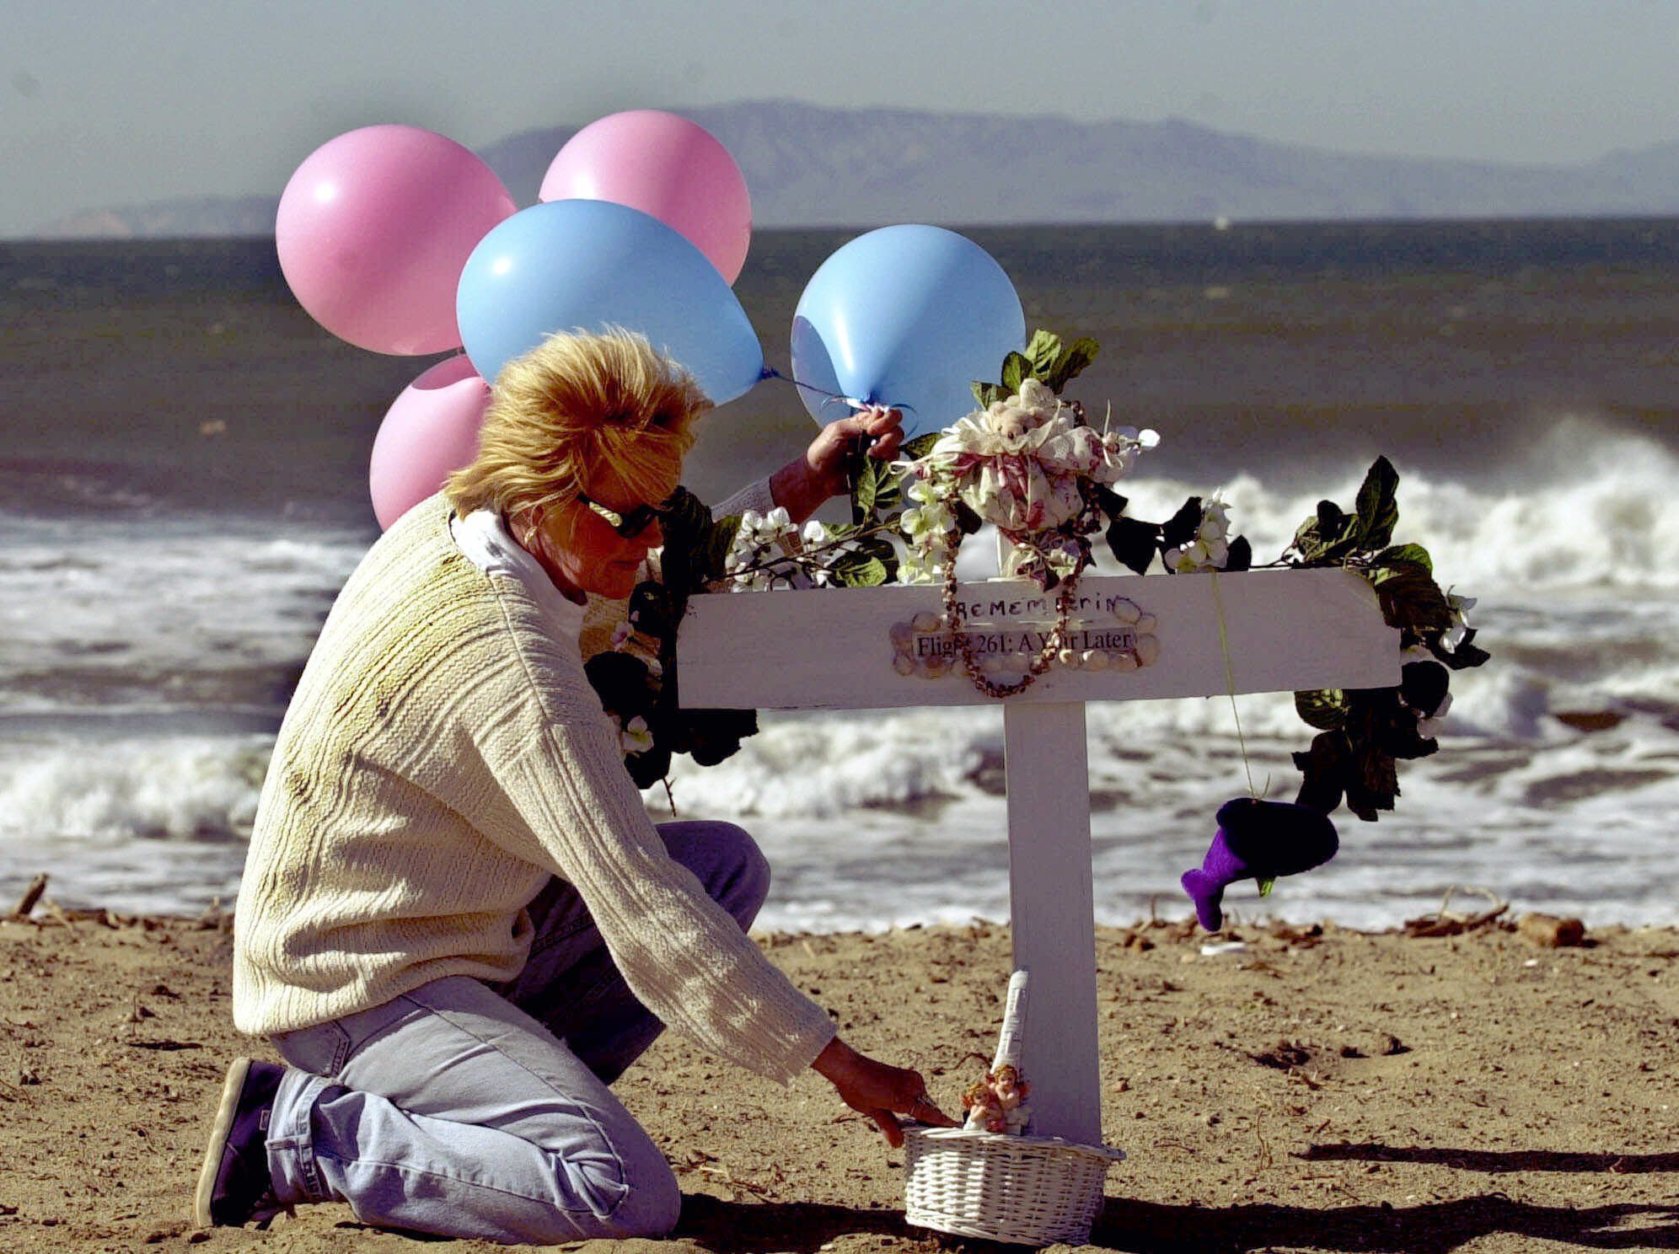 Nancy Fry of Oxnard Calif., arranges balloons and a basket at a  memorial on Silver Strand Beach in Oxnard, Calif., Tuesday, Jan. 30, 2001, created in memory of the 88 victims of the Jan. 31, 2000 crash of Alaska Airlines Flight 261.  The twin-engine MD-83 was on its way to San Francisco and then Seattle when it started pitching, then spiraled from nearly 18,000 feet into the Pacific Ocean.  (AP Photo/Nick Ut)